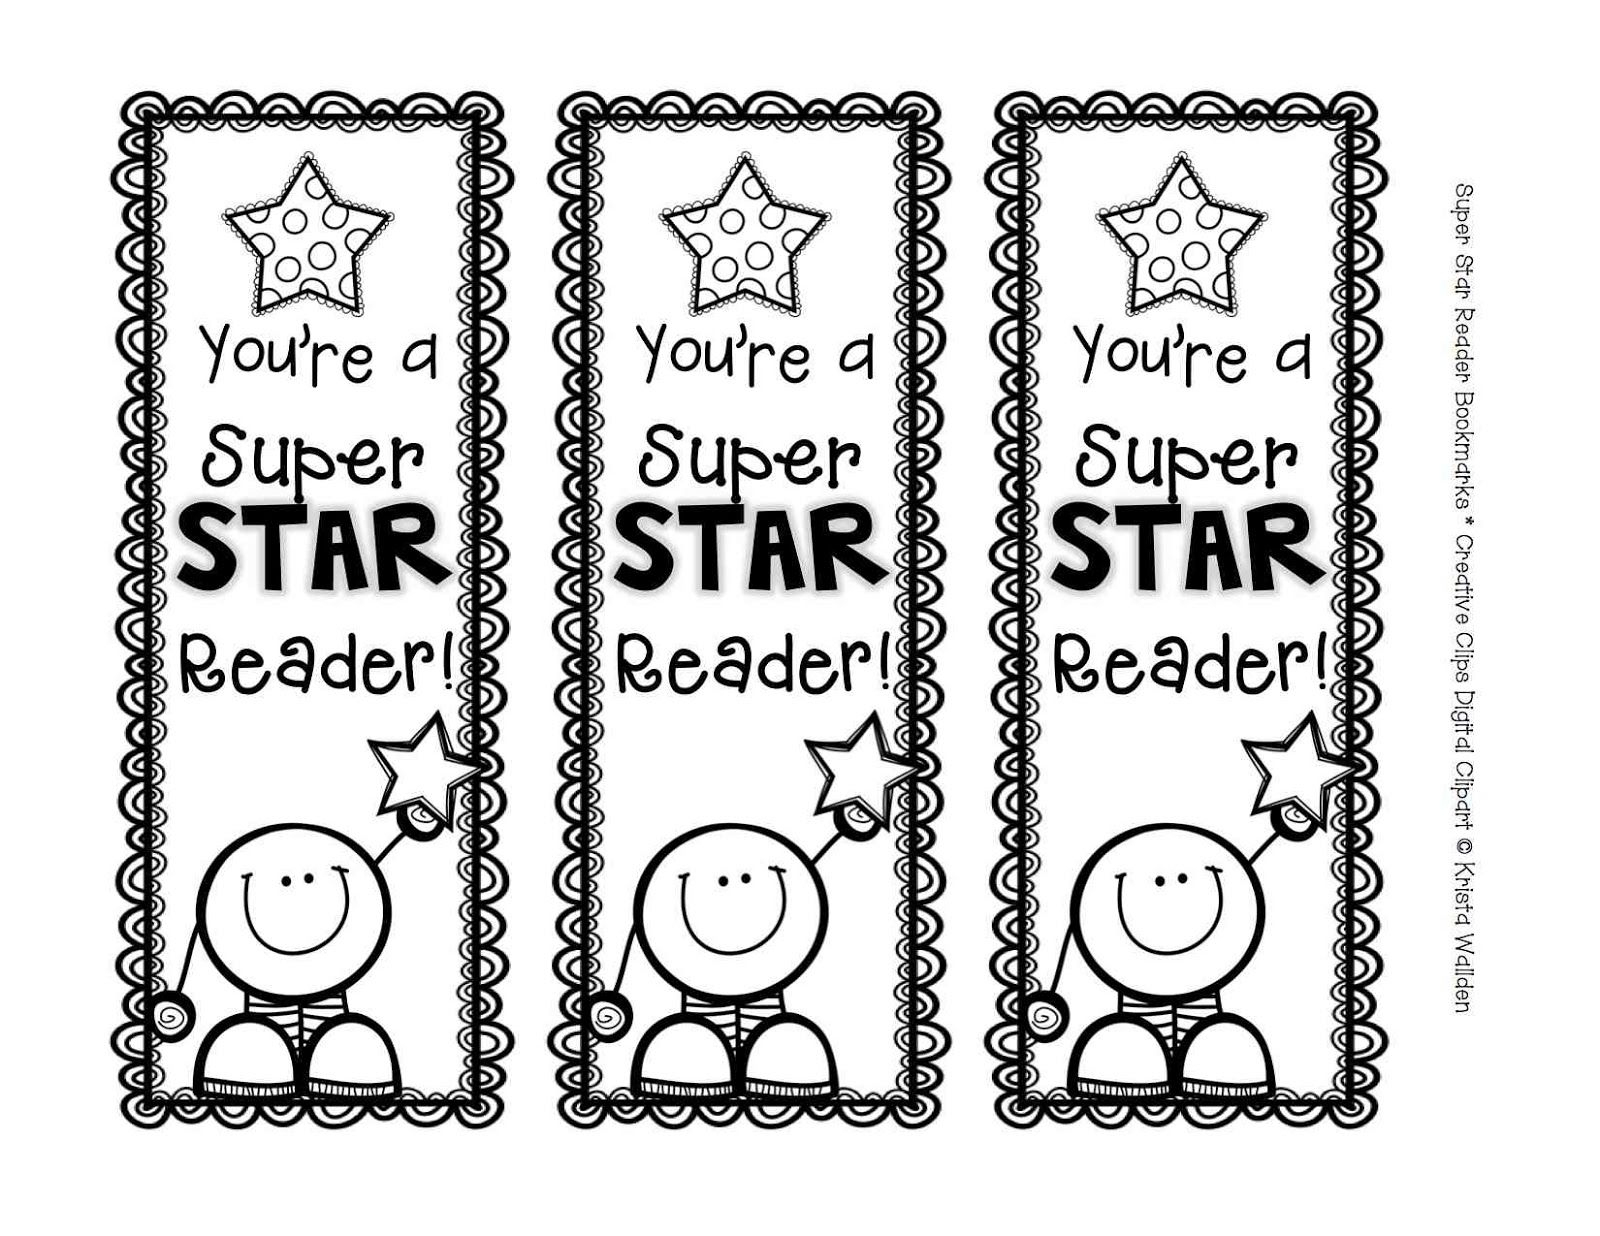 Free Printable Bookmark Templates To Color - Google Search - Free Printable Bookmarks For Libraries